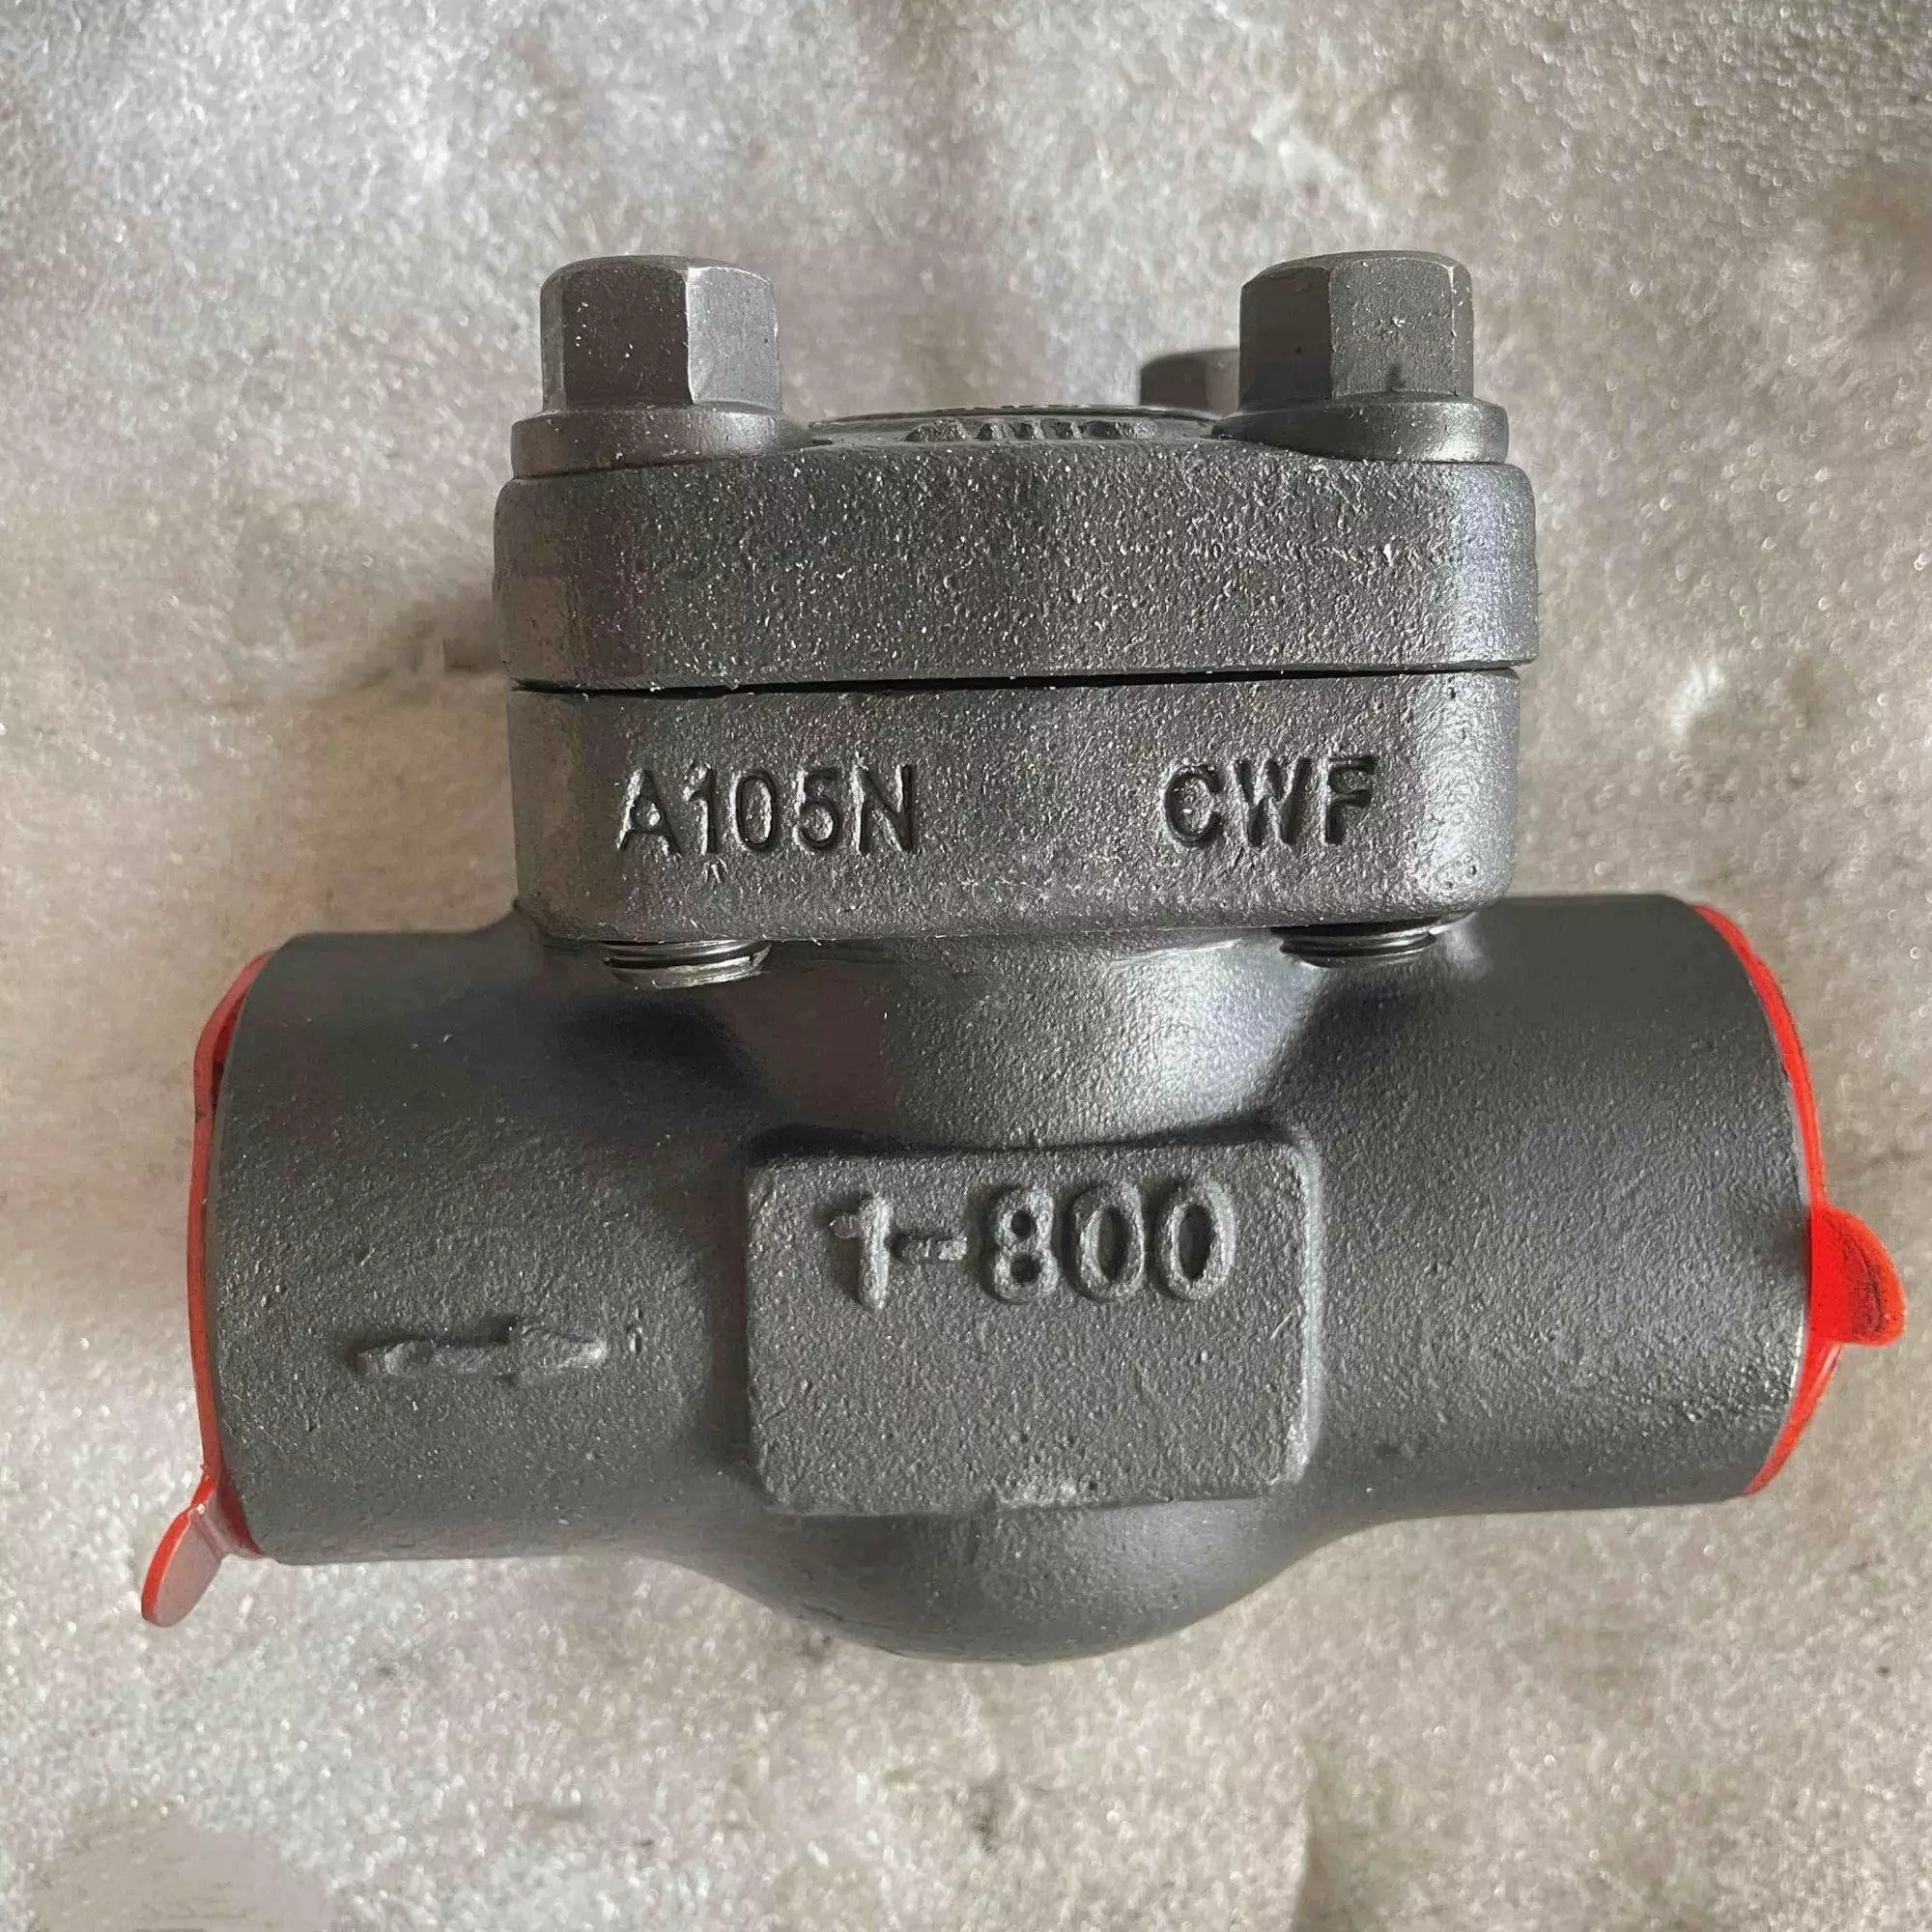 ASTM A105N Check Valve, Lift Type, API 602, 1 IN, 800 LB, SW